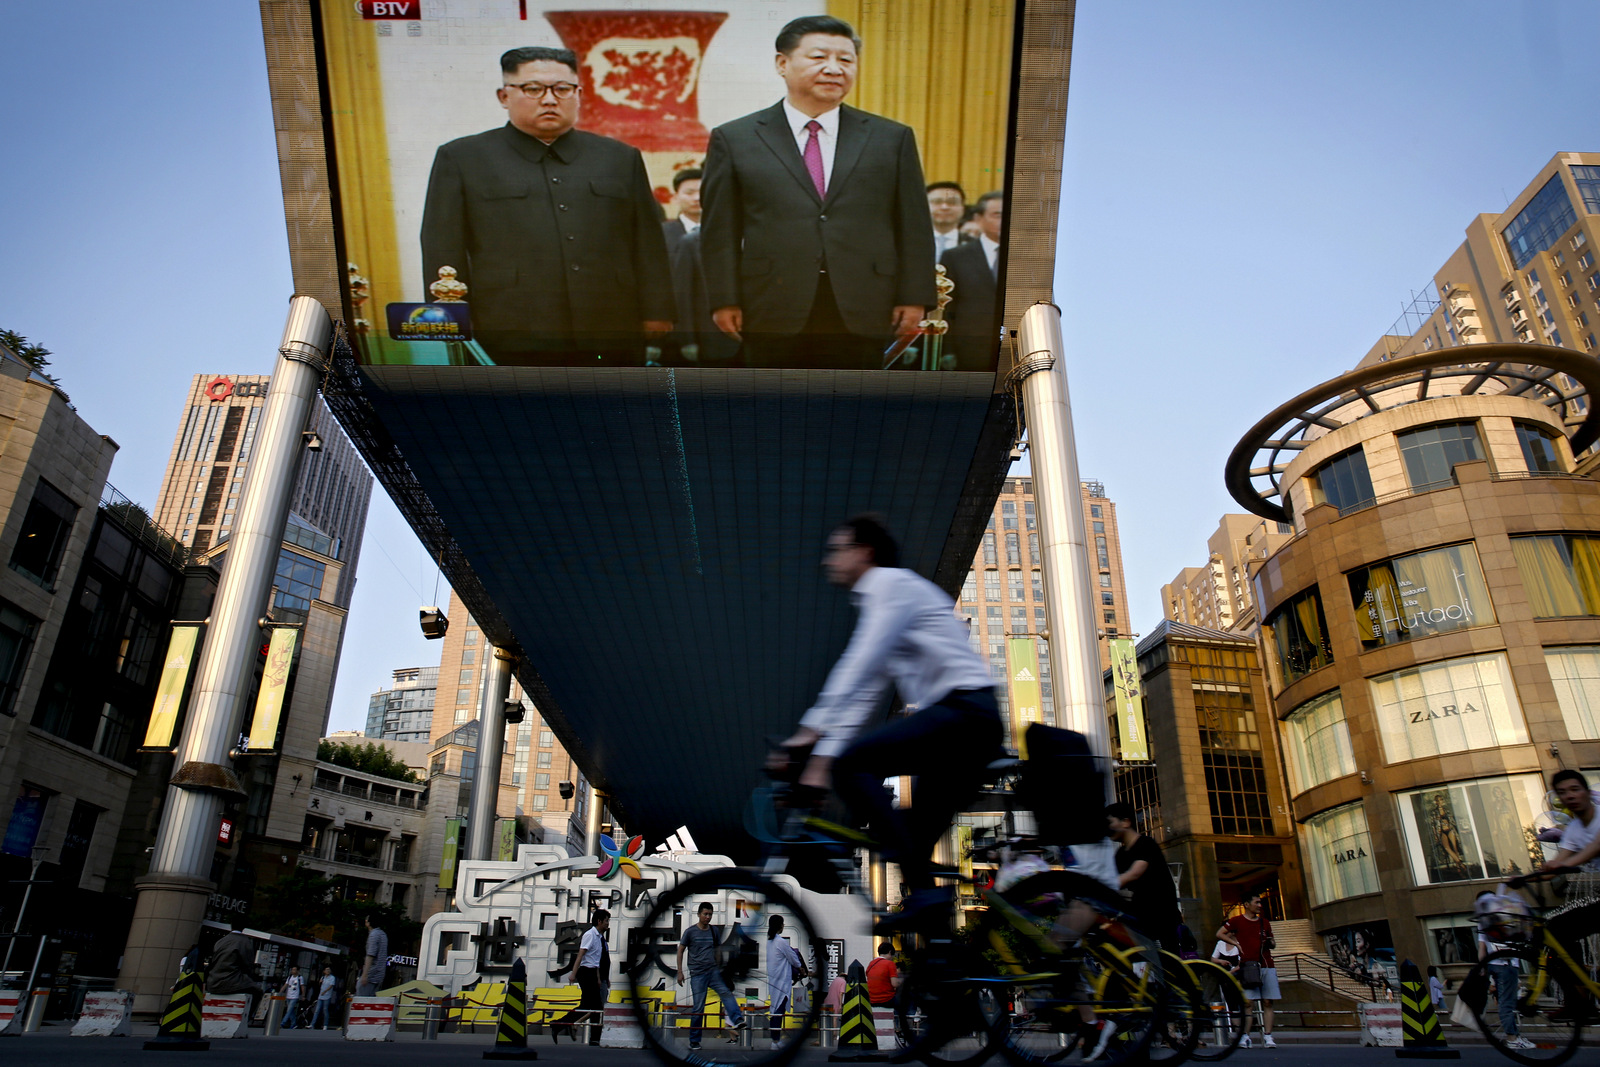 A giant TV screen broadcasting the meeting of North Korean leader Kim Jong Un and Chinese President Xi Jinping in Beijing, June 19, 2018. Andy Wong | AP